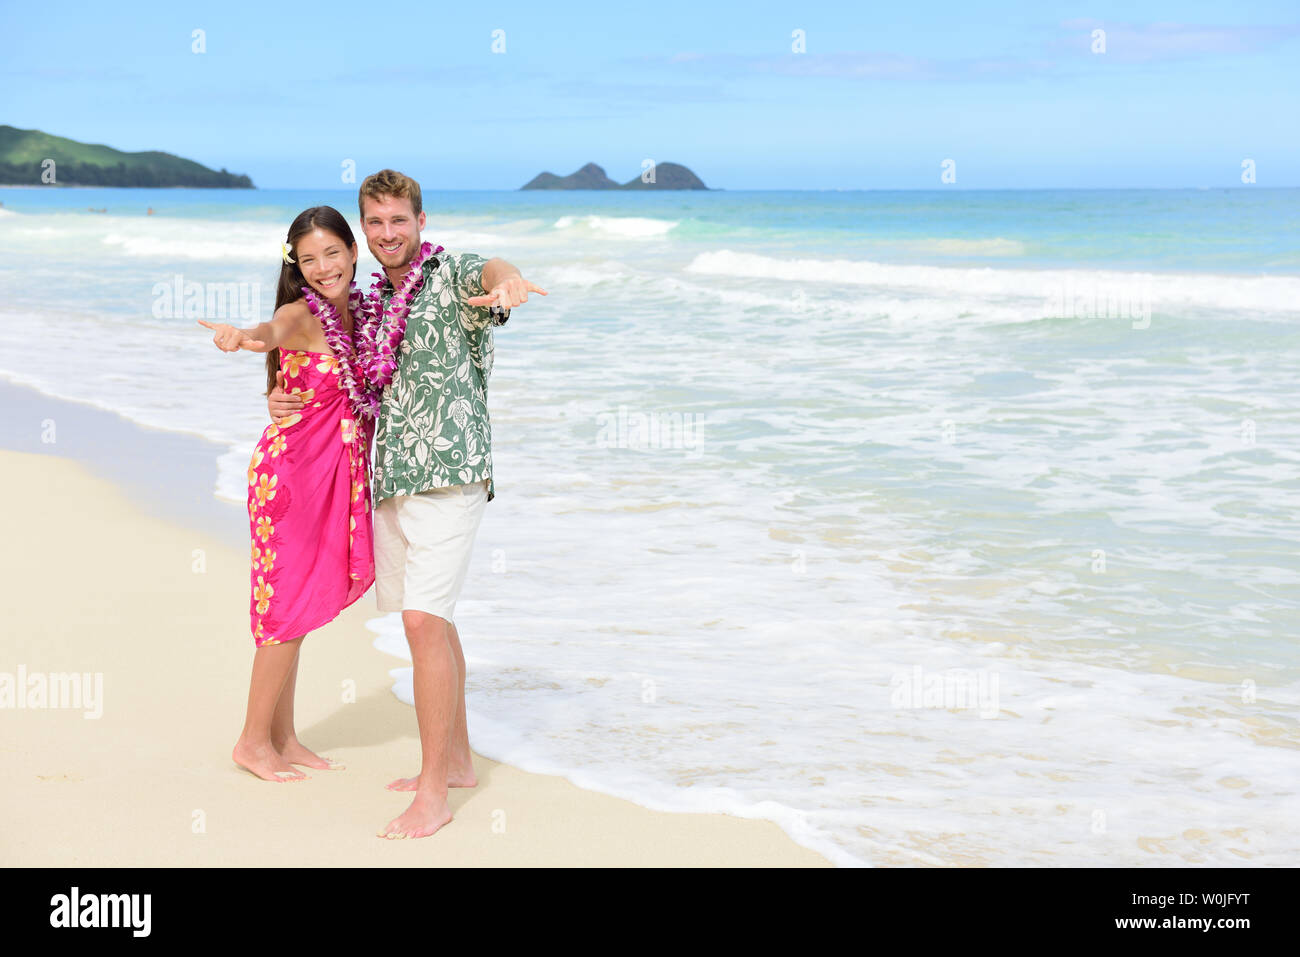 Portrait of couple of tourists happy standing on Hawaiian beach at their Hawaii vacation. Asian woman and Caucasian man wearing flower lei garland and Aloha clothing showing Shaka hand sign on travel. Stock Photo